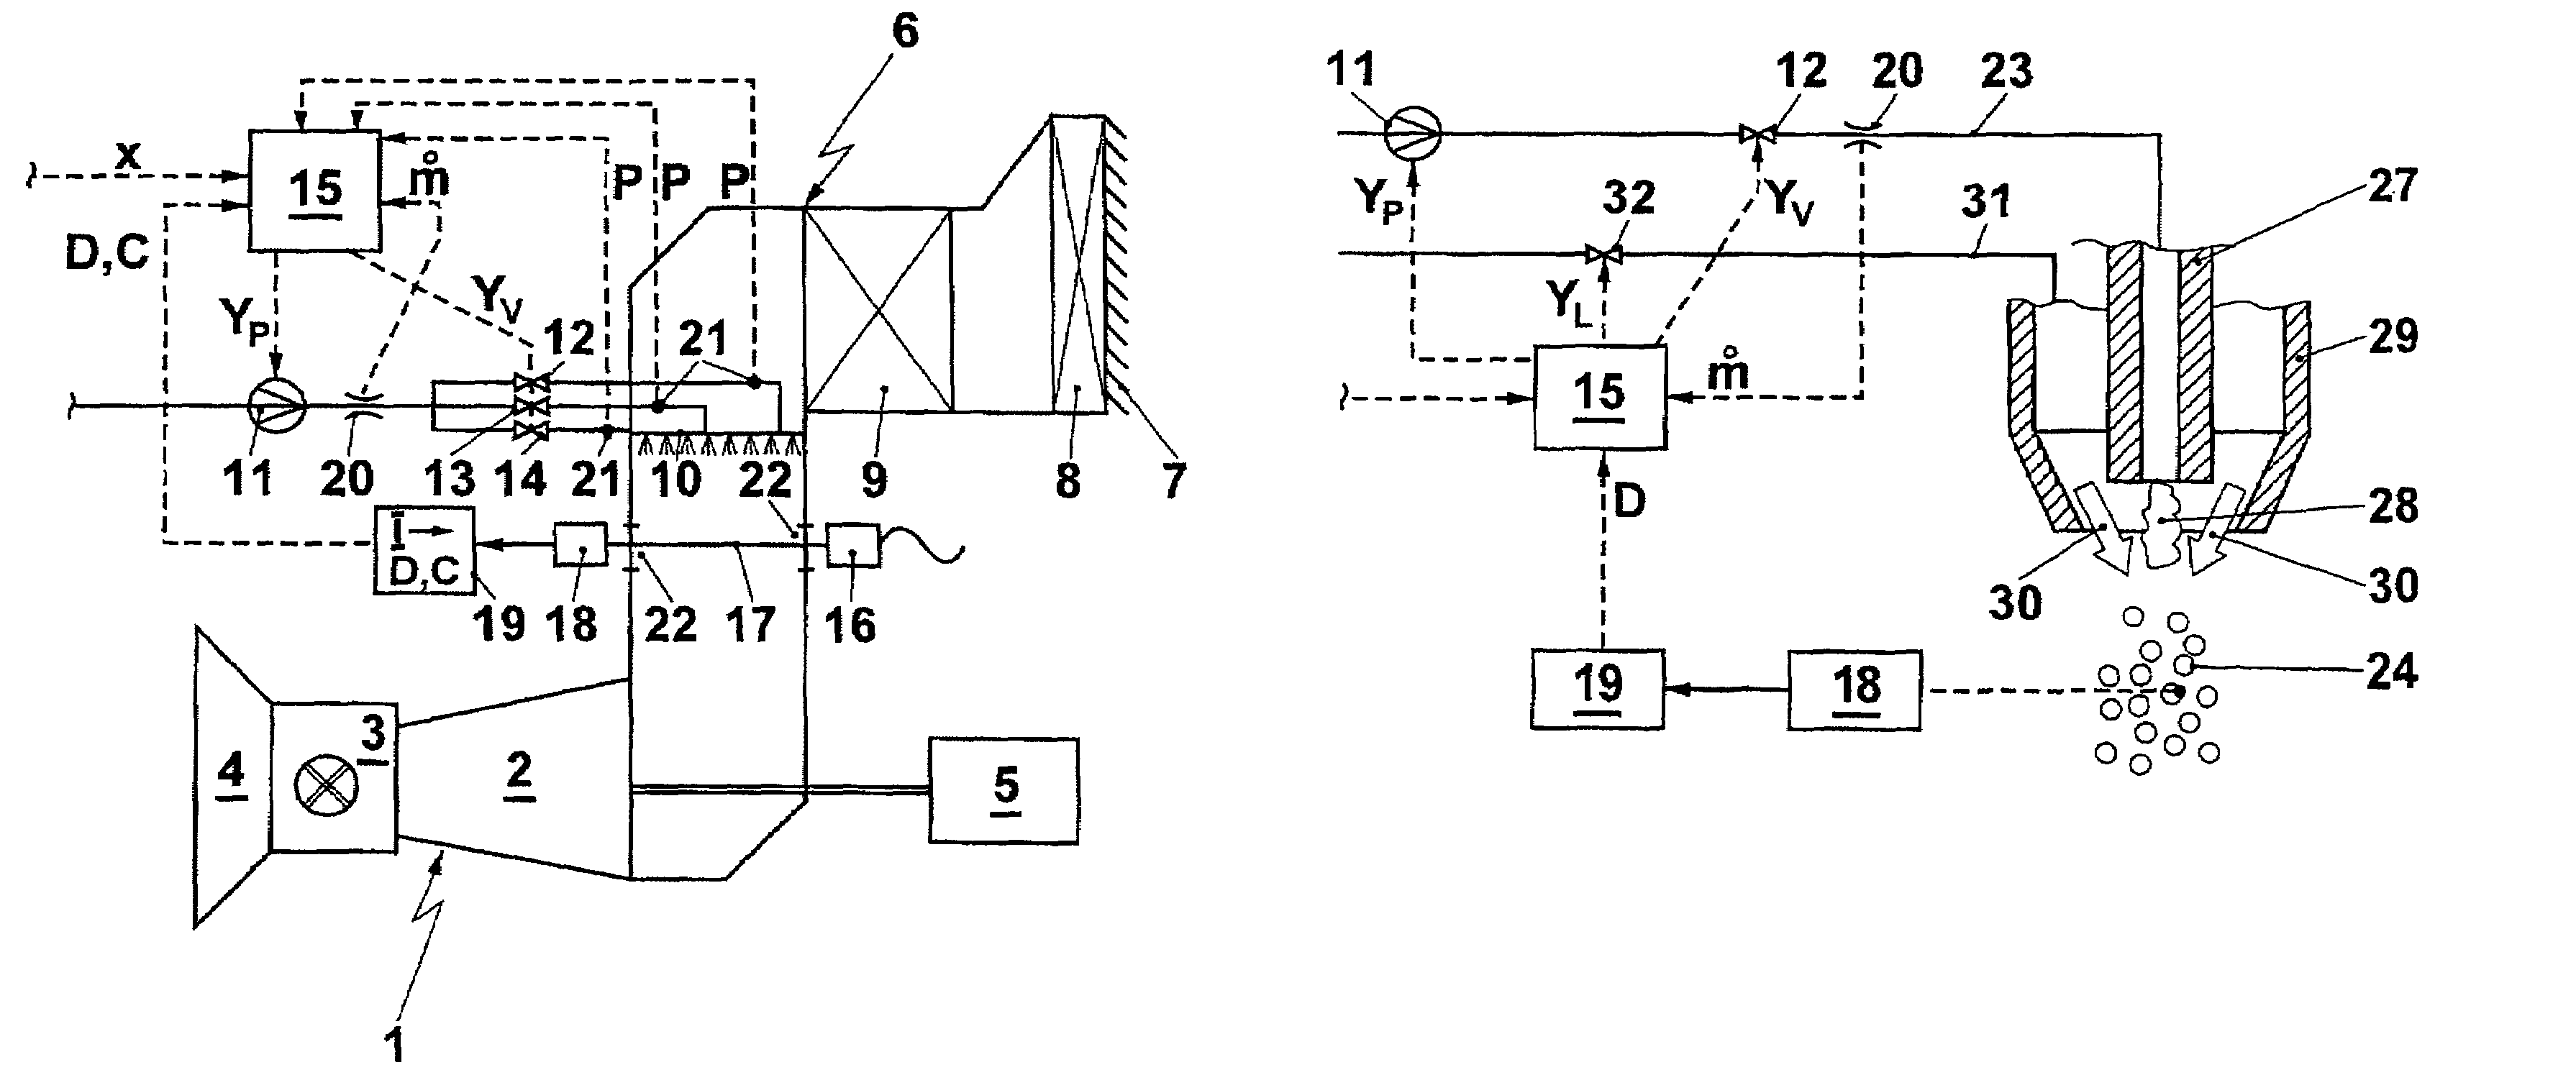 Method for operating an air-breathing engine